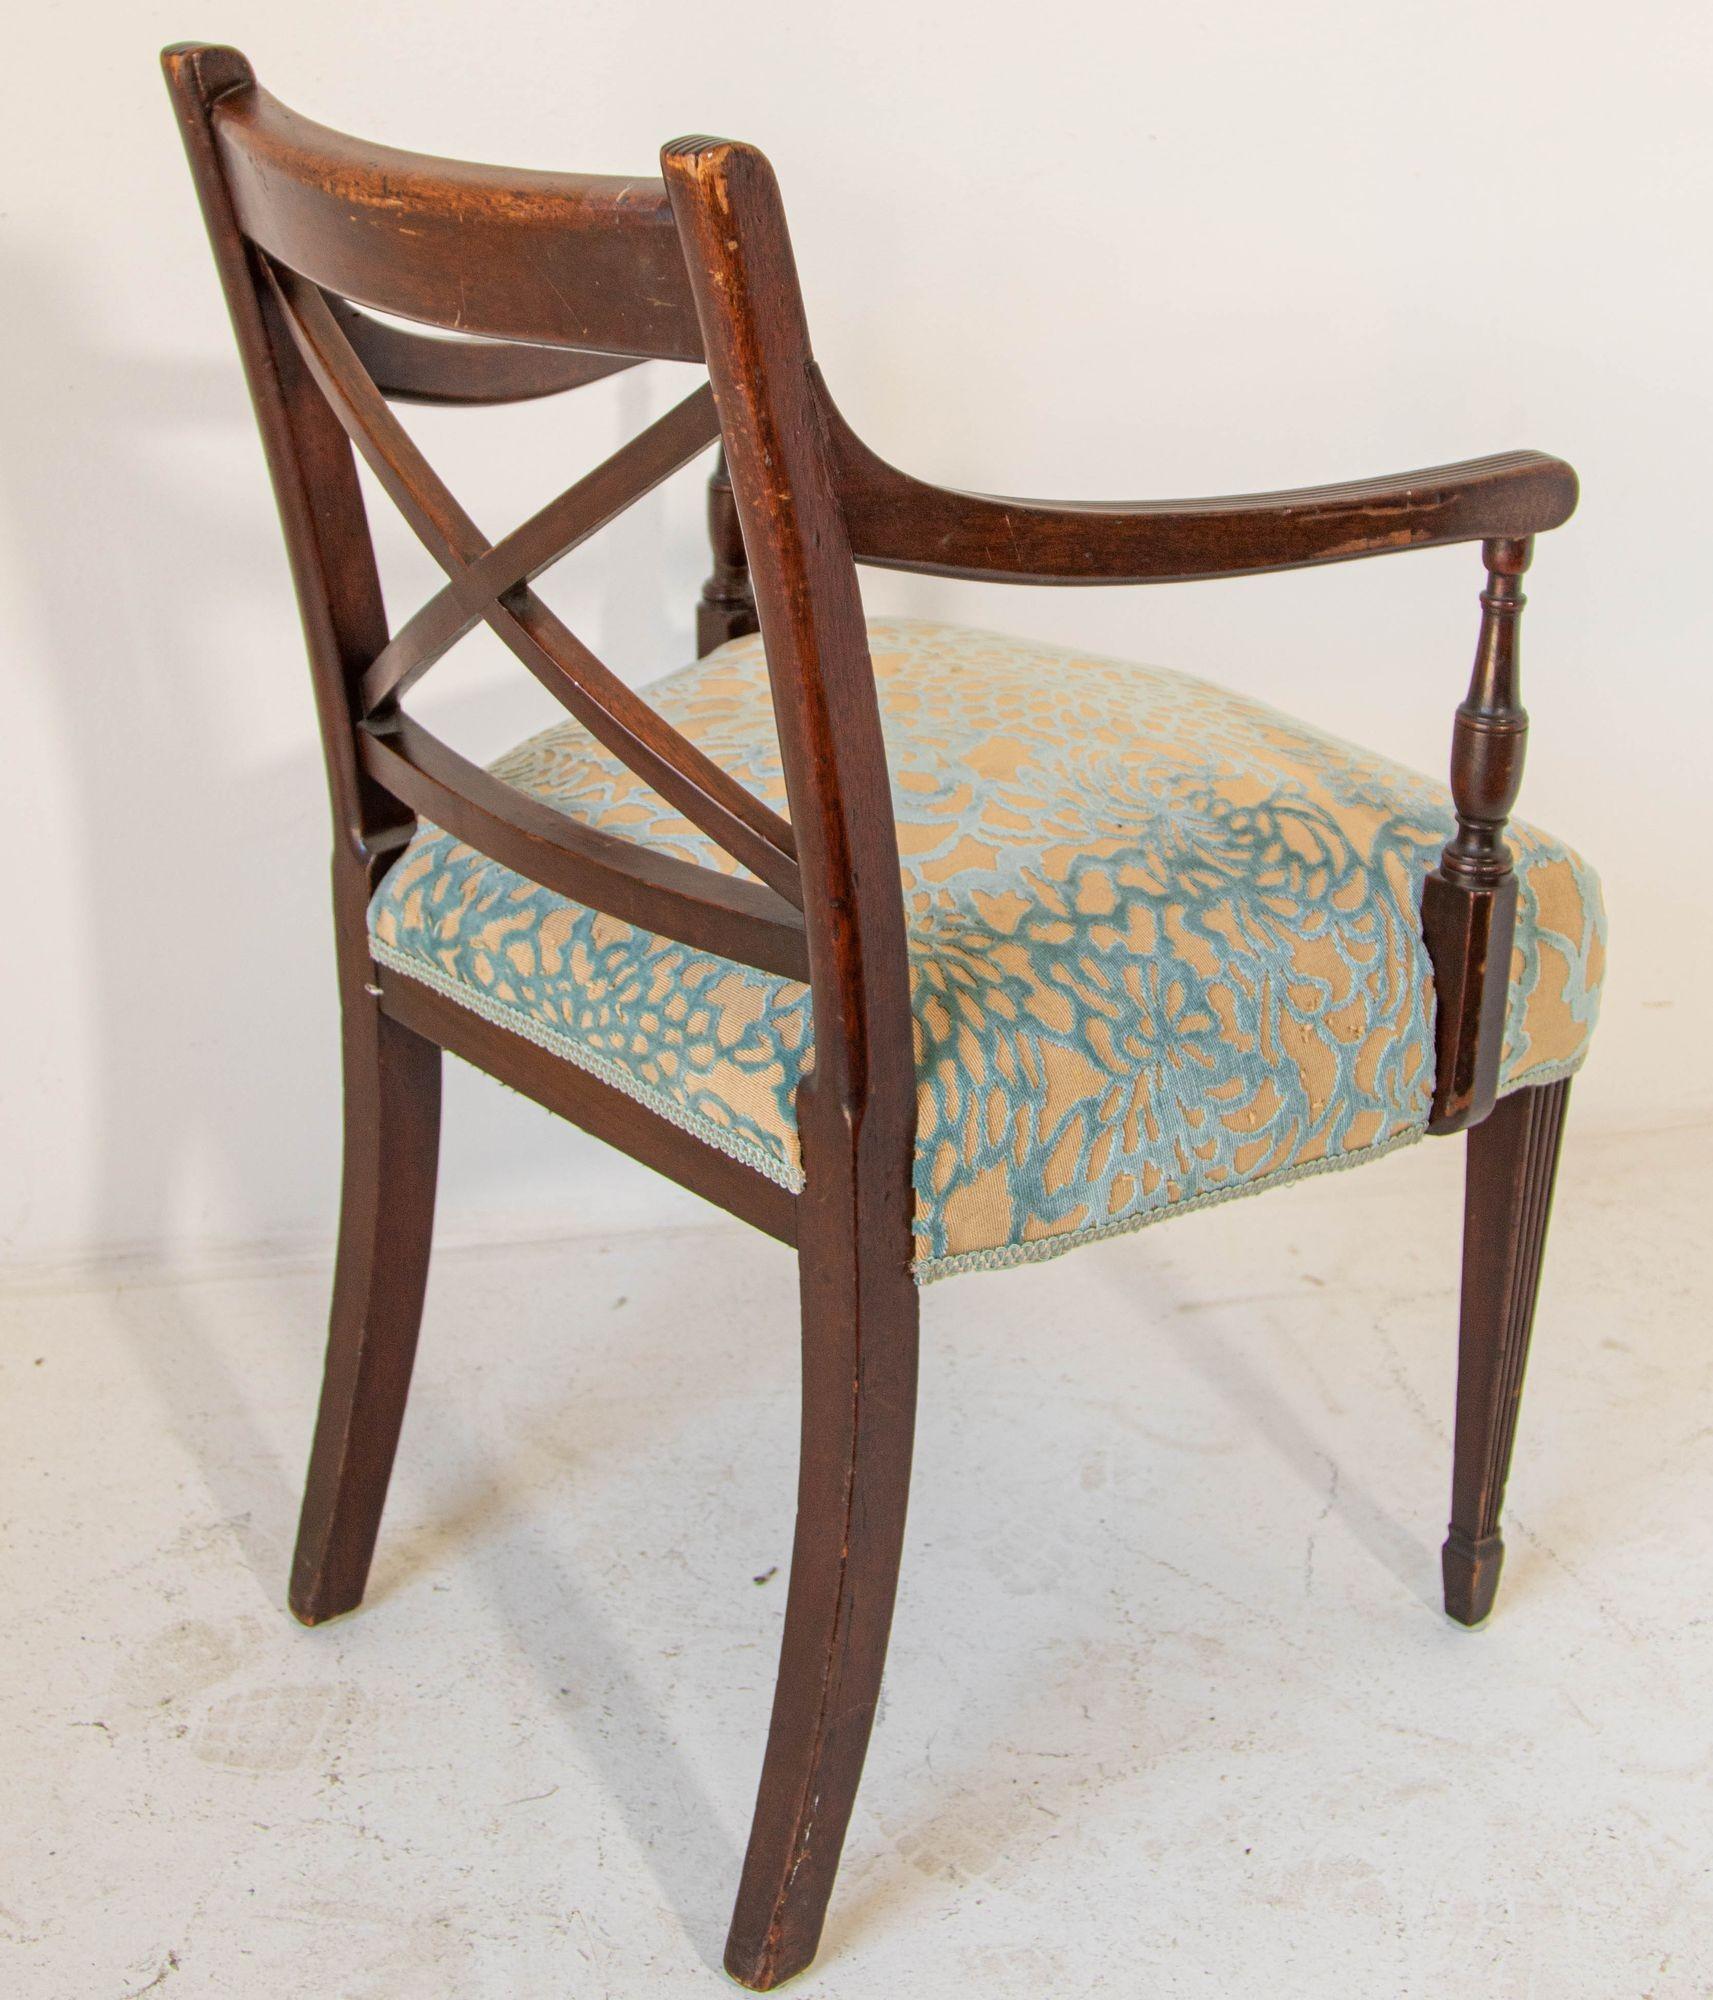 Vintage Carved Wood Side Chair Hollywood Regency English Style In Fair Condition For Sale In North Hollywood, CA